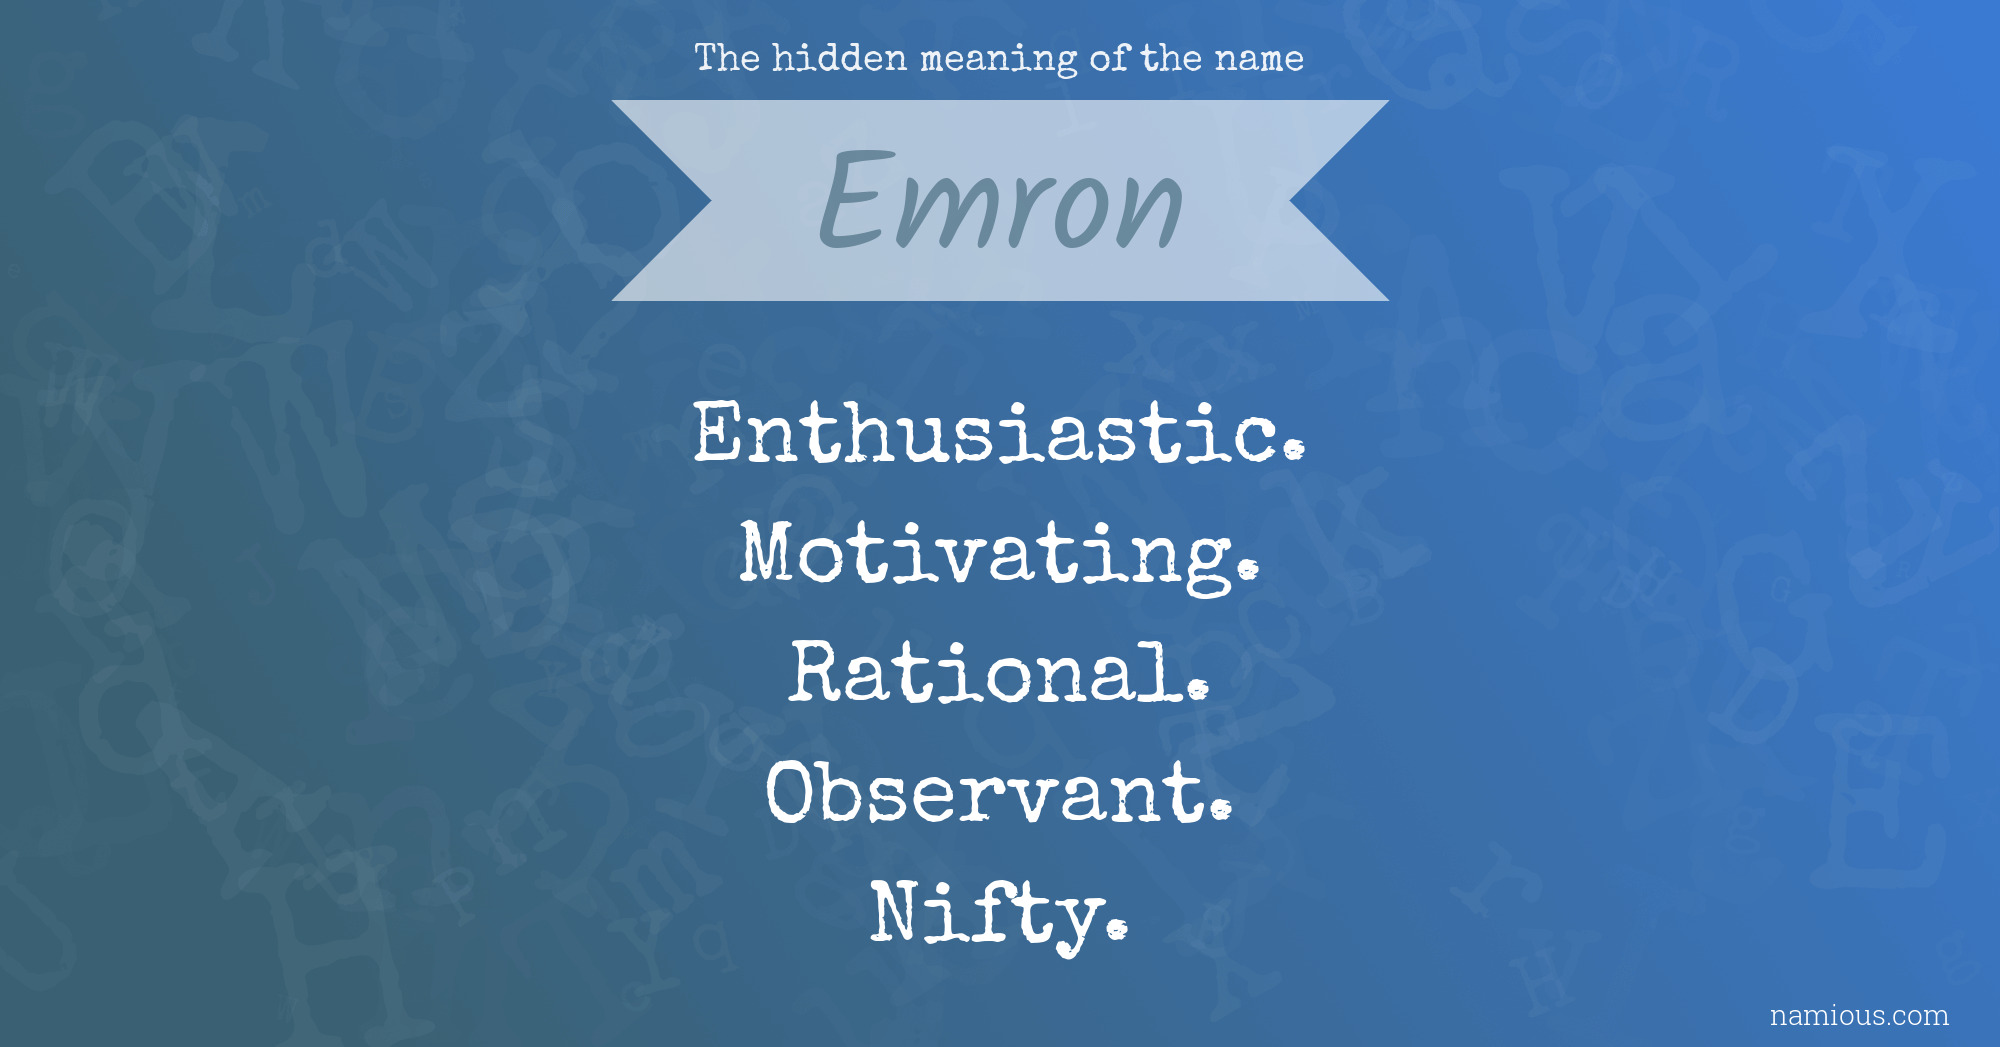 The hidden meaning of the name Emron